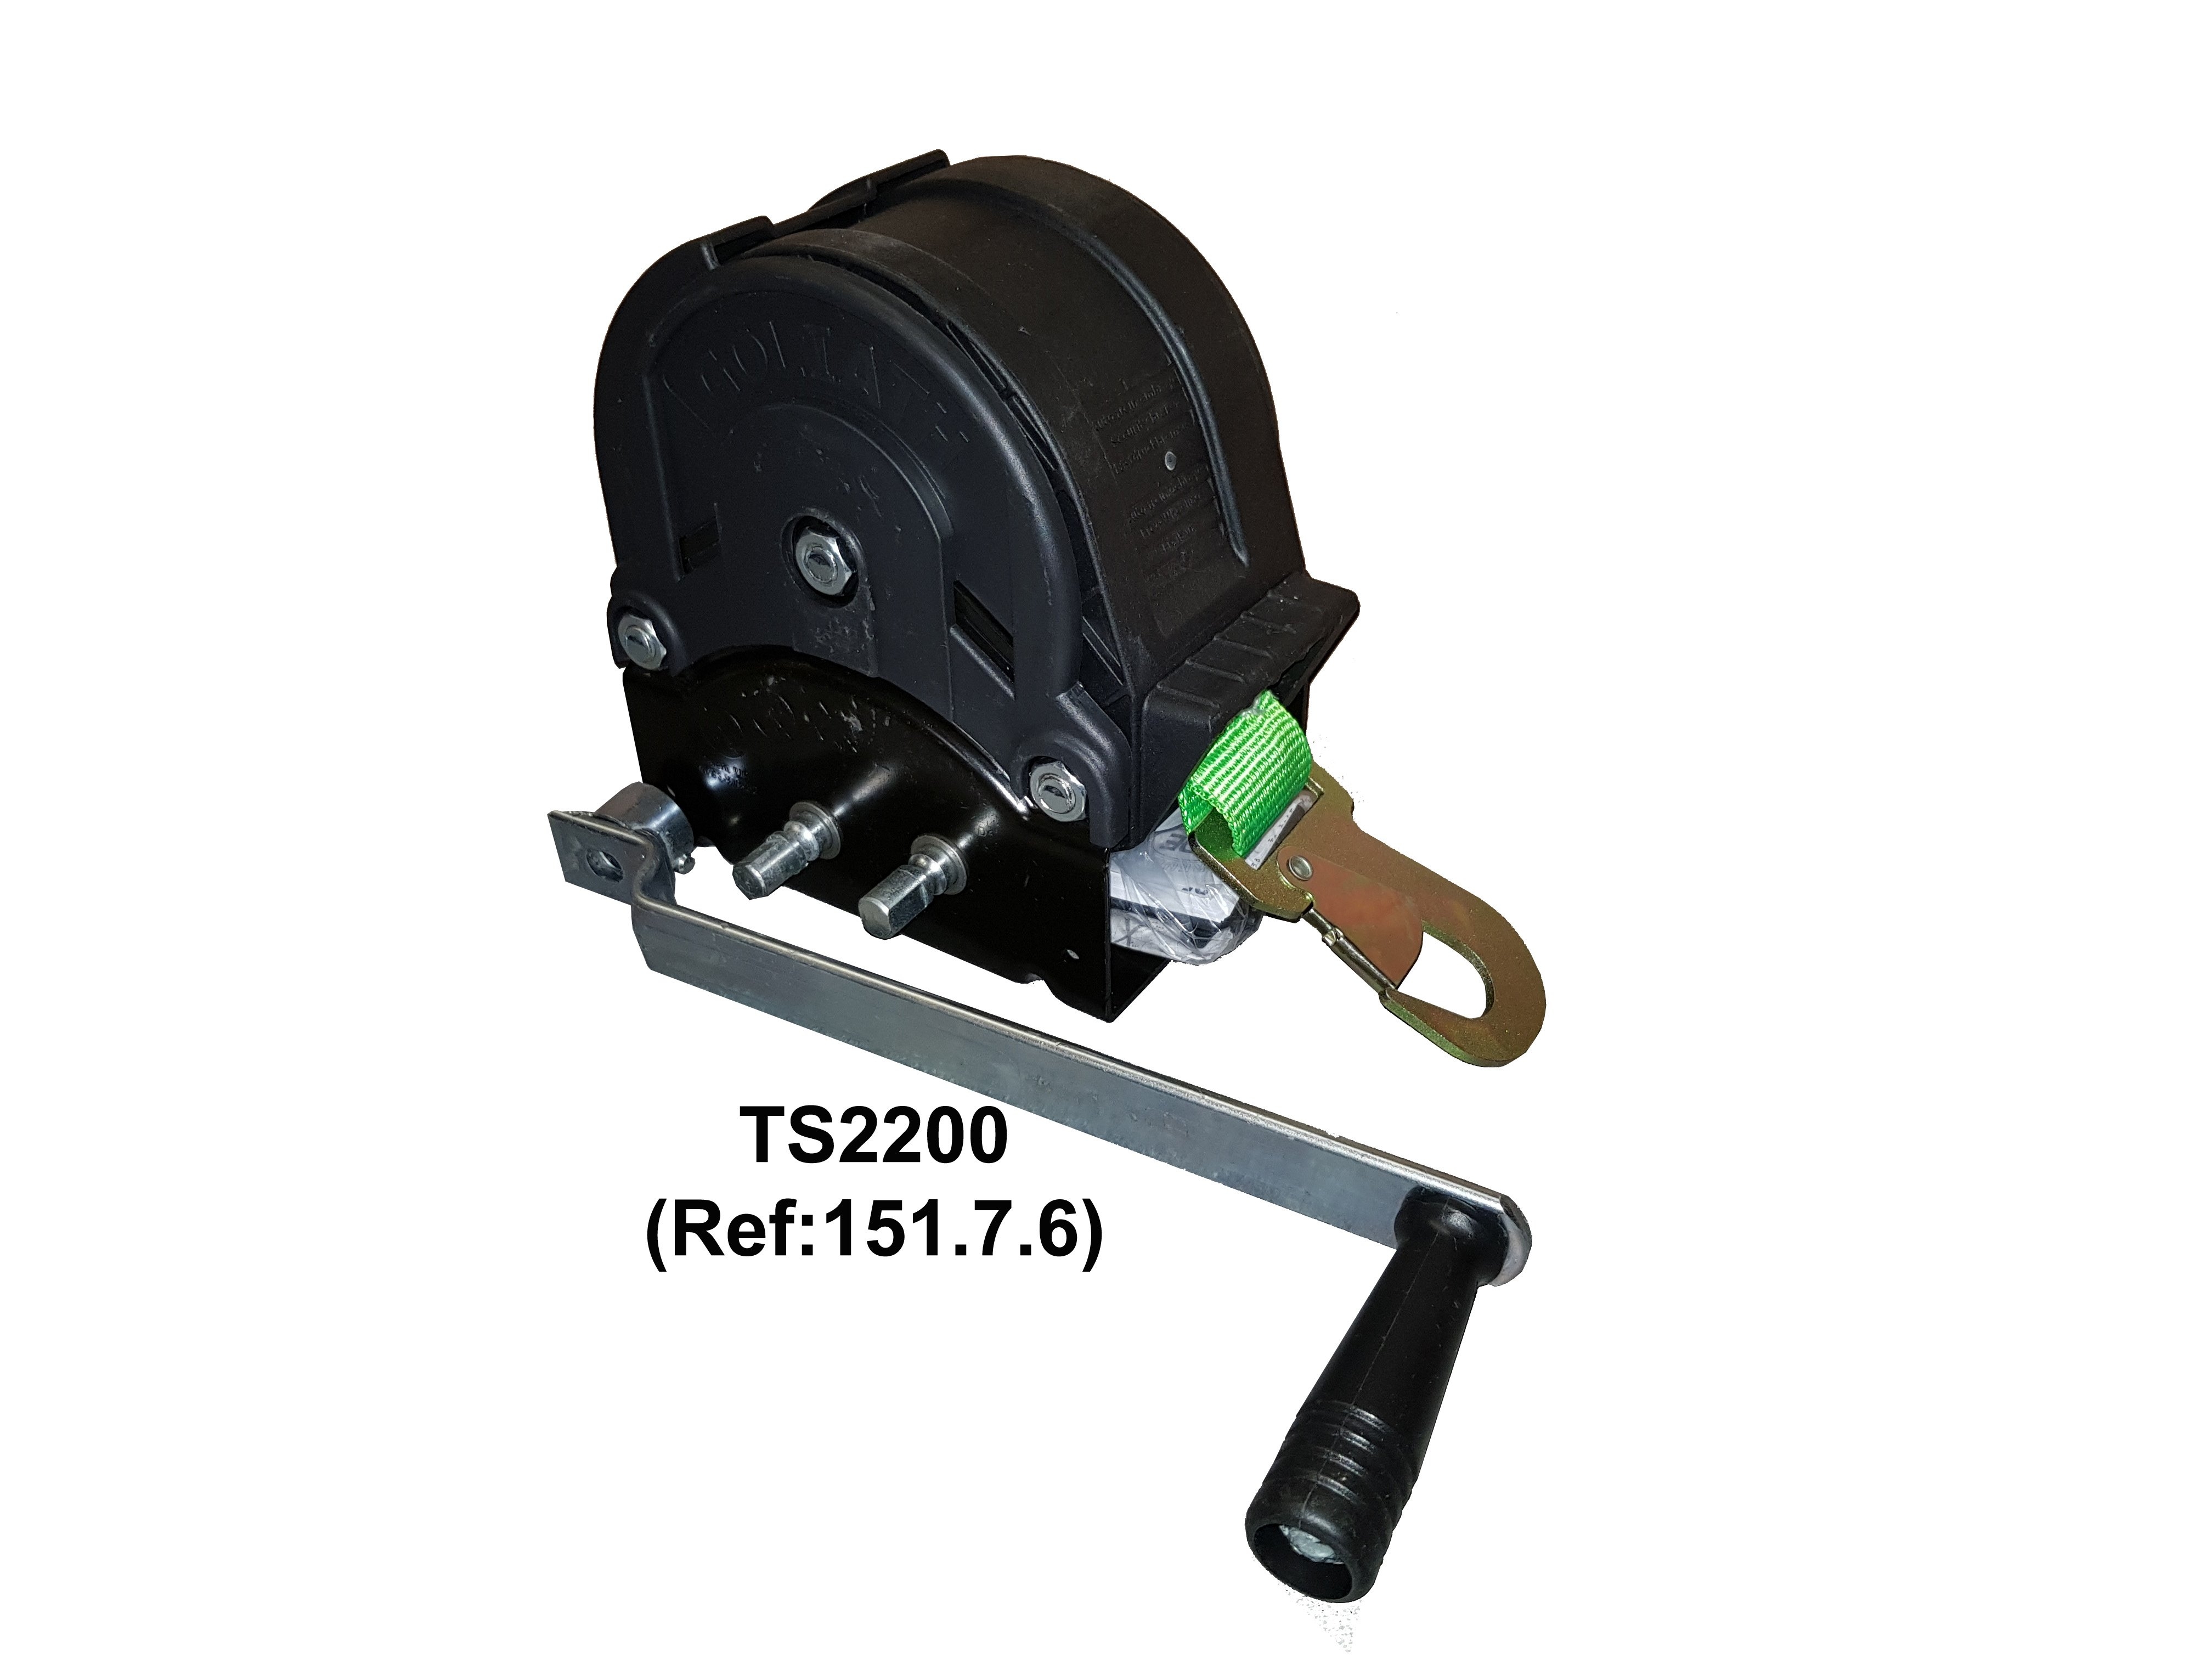 Go-Ts Series Goliath Boat Trailer Security Winch – Complete With Strap And Hook (151.7) – Go-Ts2200 Trailer Winch With Strap And Hook 2200kg Ref:151.7.6 – Trailer Winch – Black – Steel